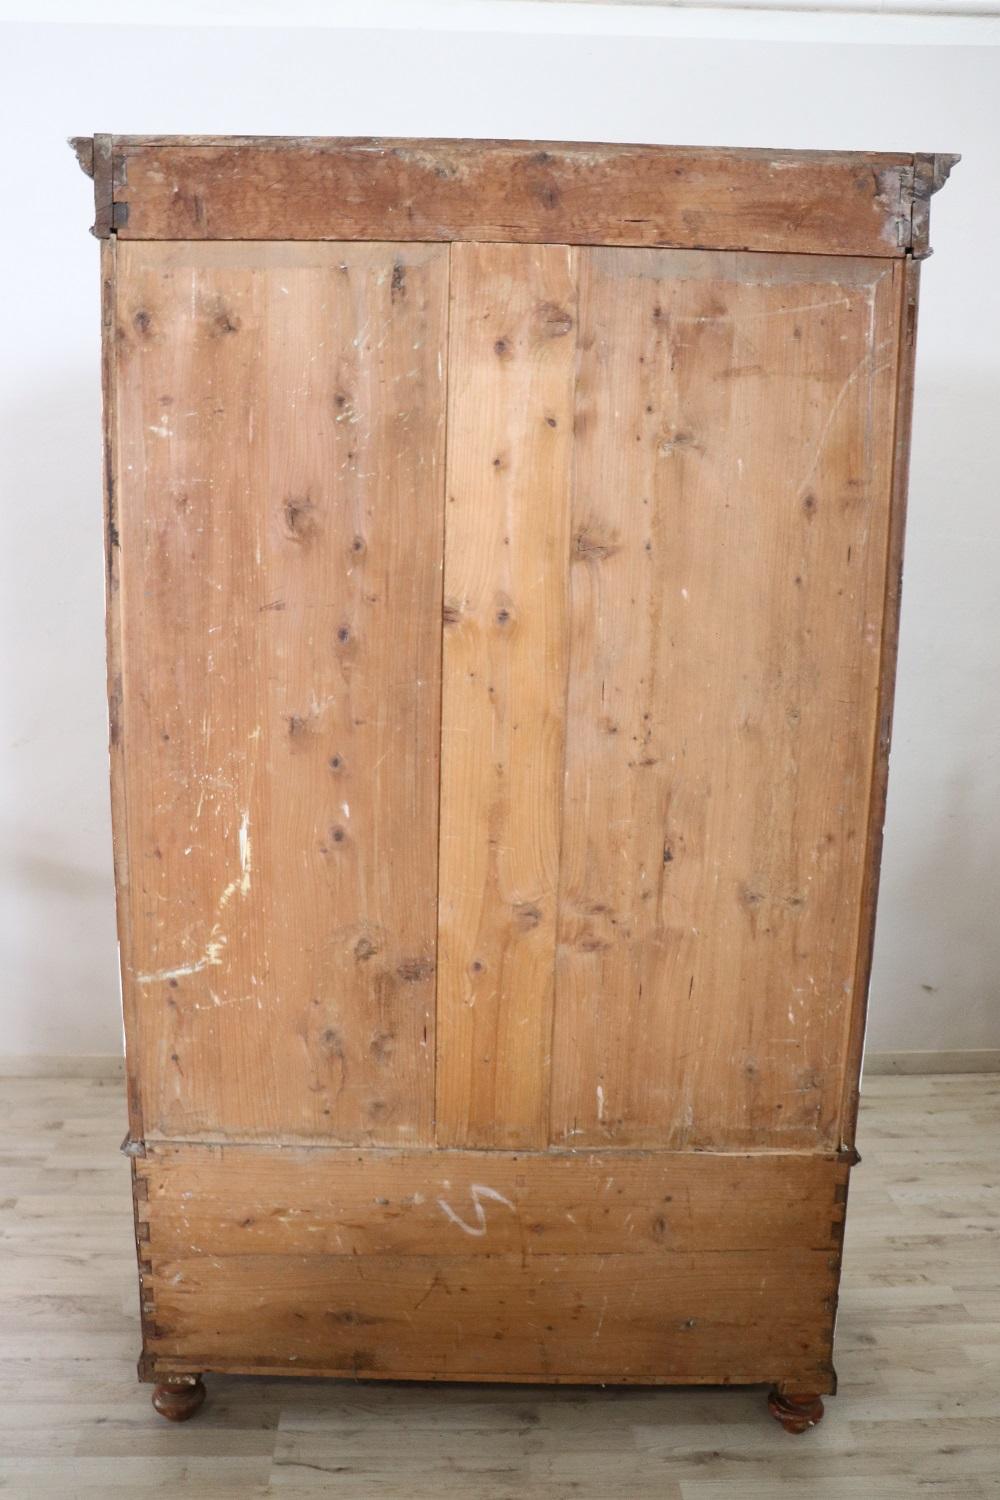 19th Century Italian Solid Cherry and Walnut Wood Antique Wardrobe or Armoire 1